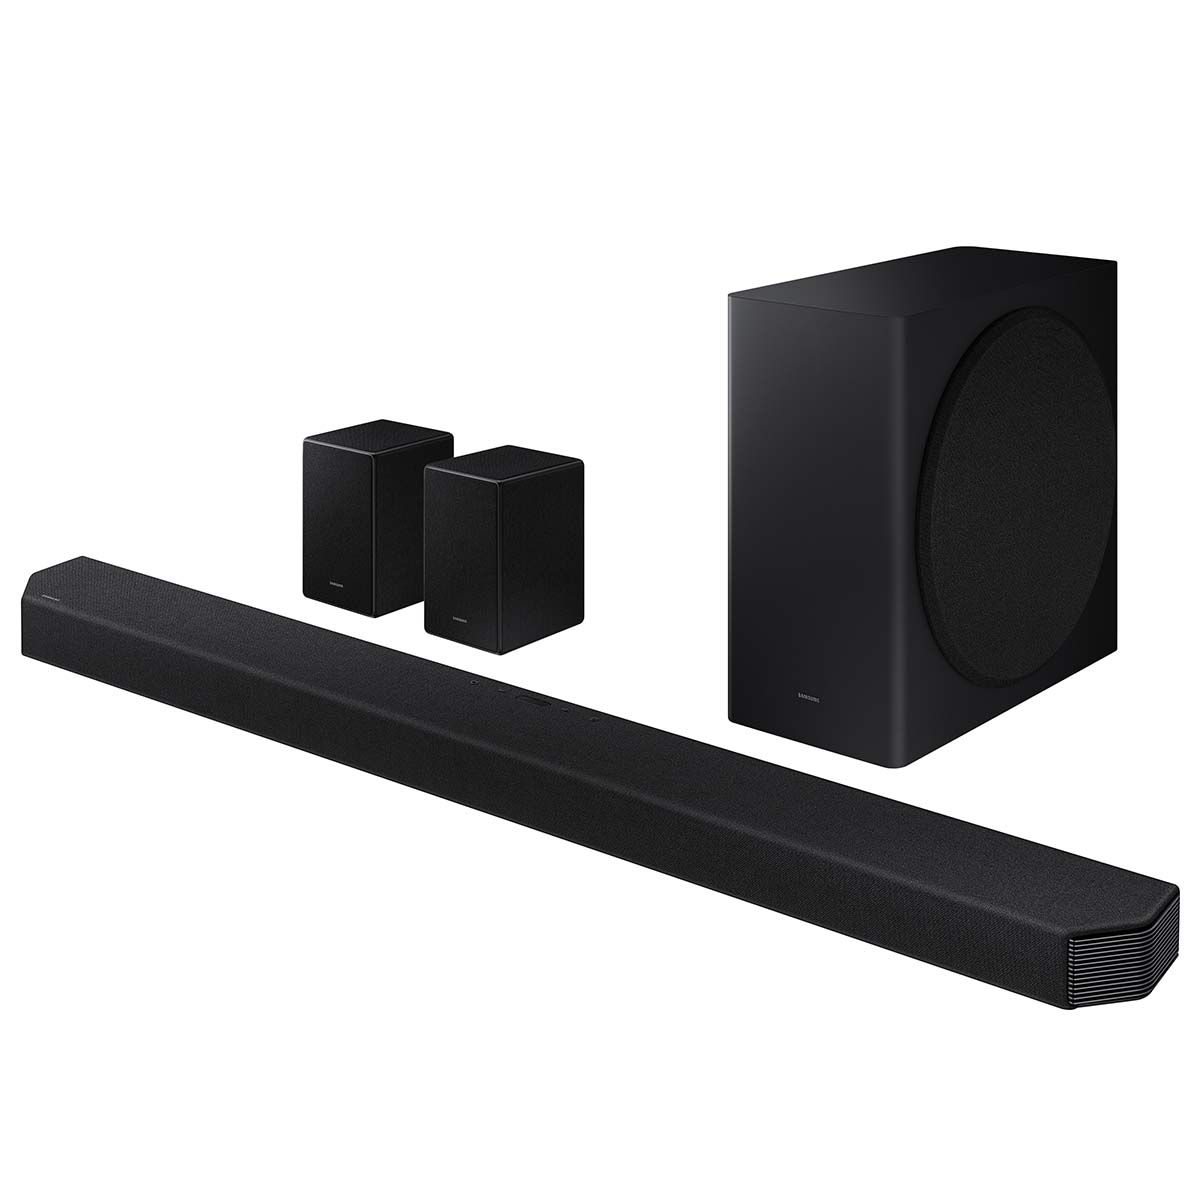 Svække Ny mening Forestående Samsung HW-Q950A 11.1.4 Dolby Atmos Soundbar with Wireless Subwoofer and  Surrounds | Audio Advice